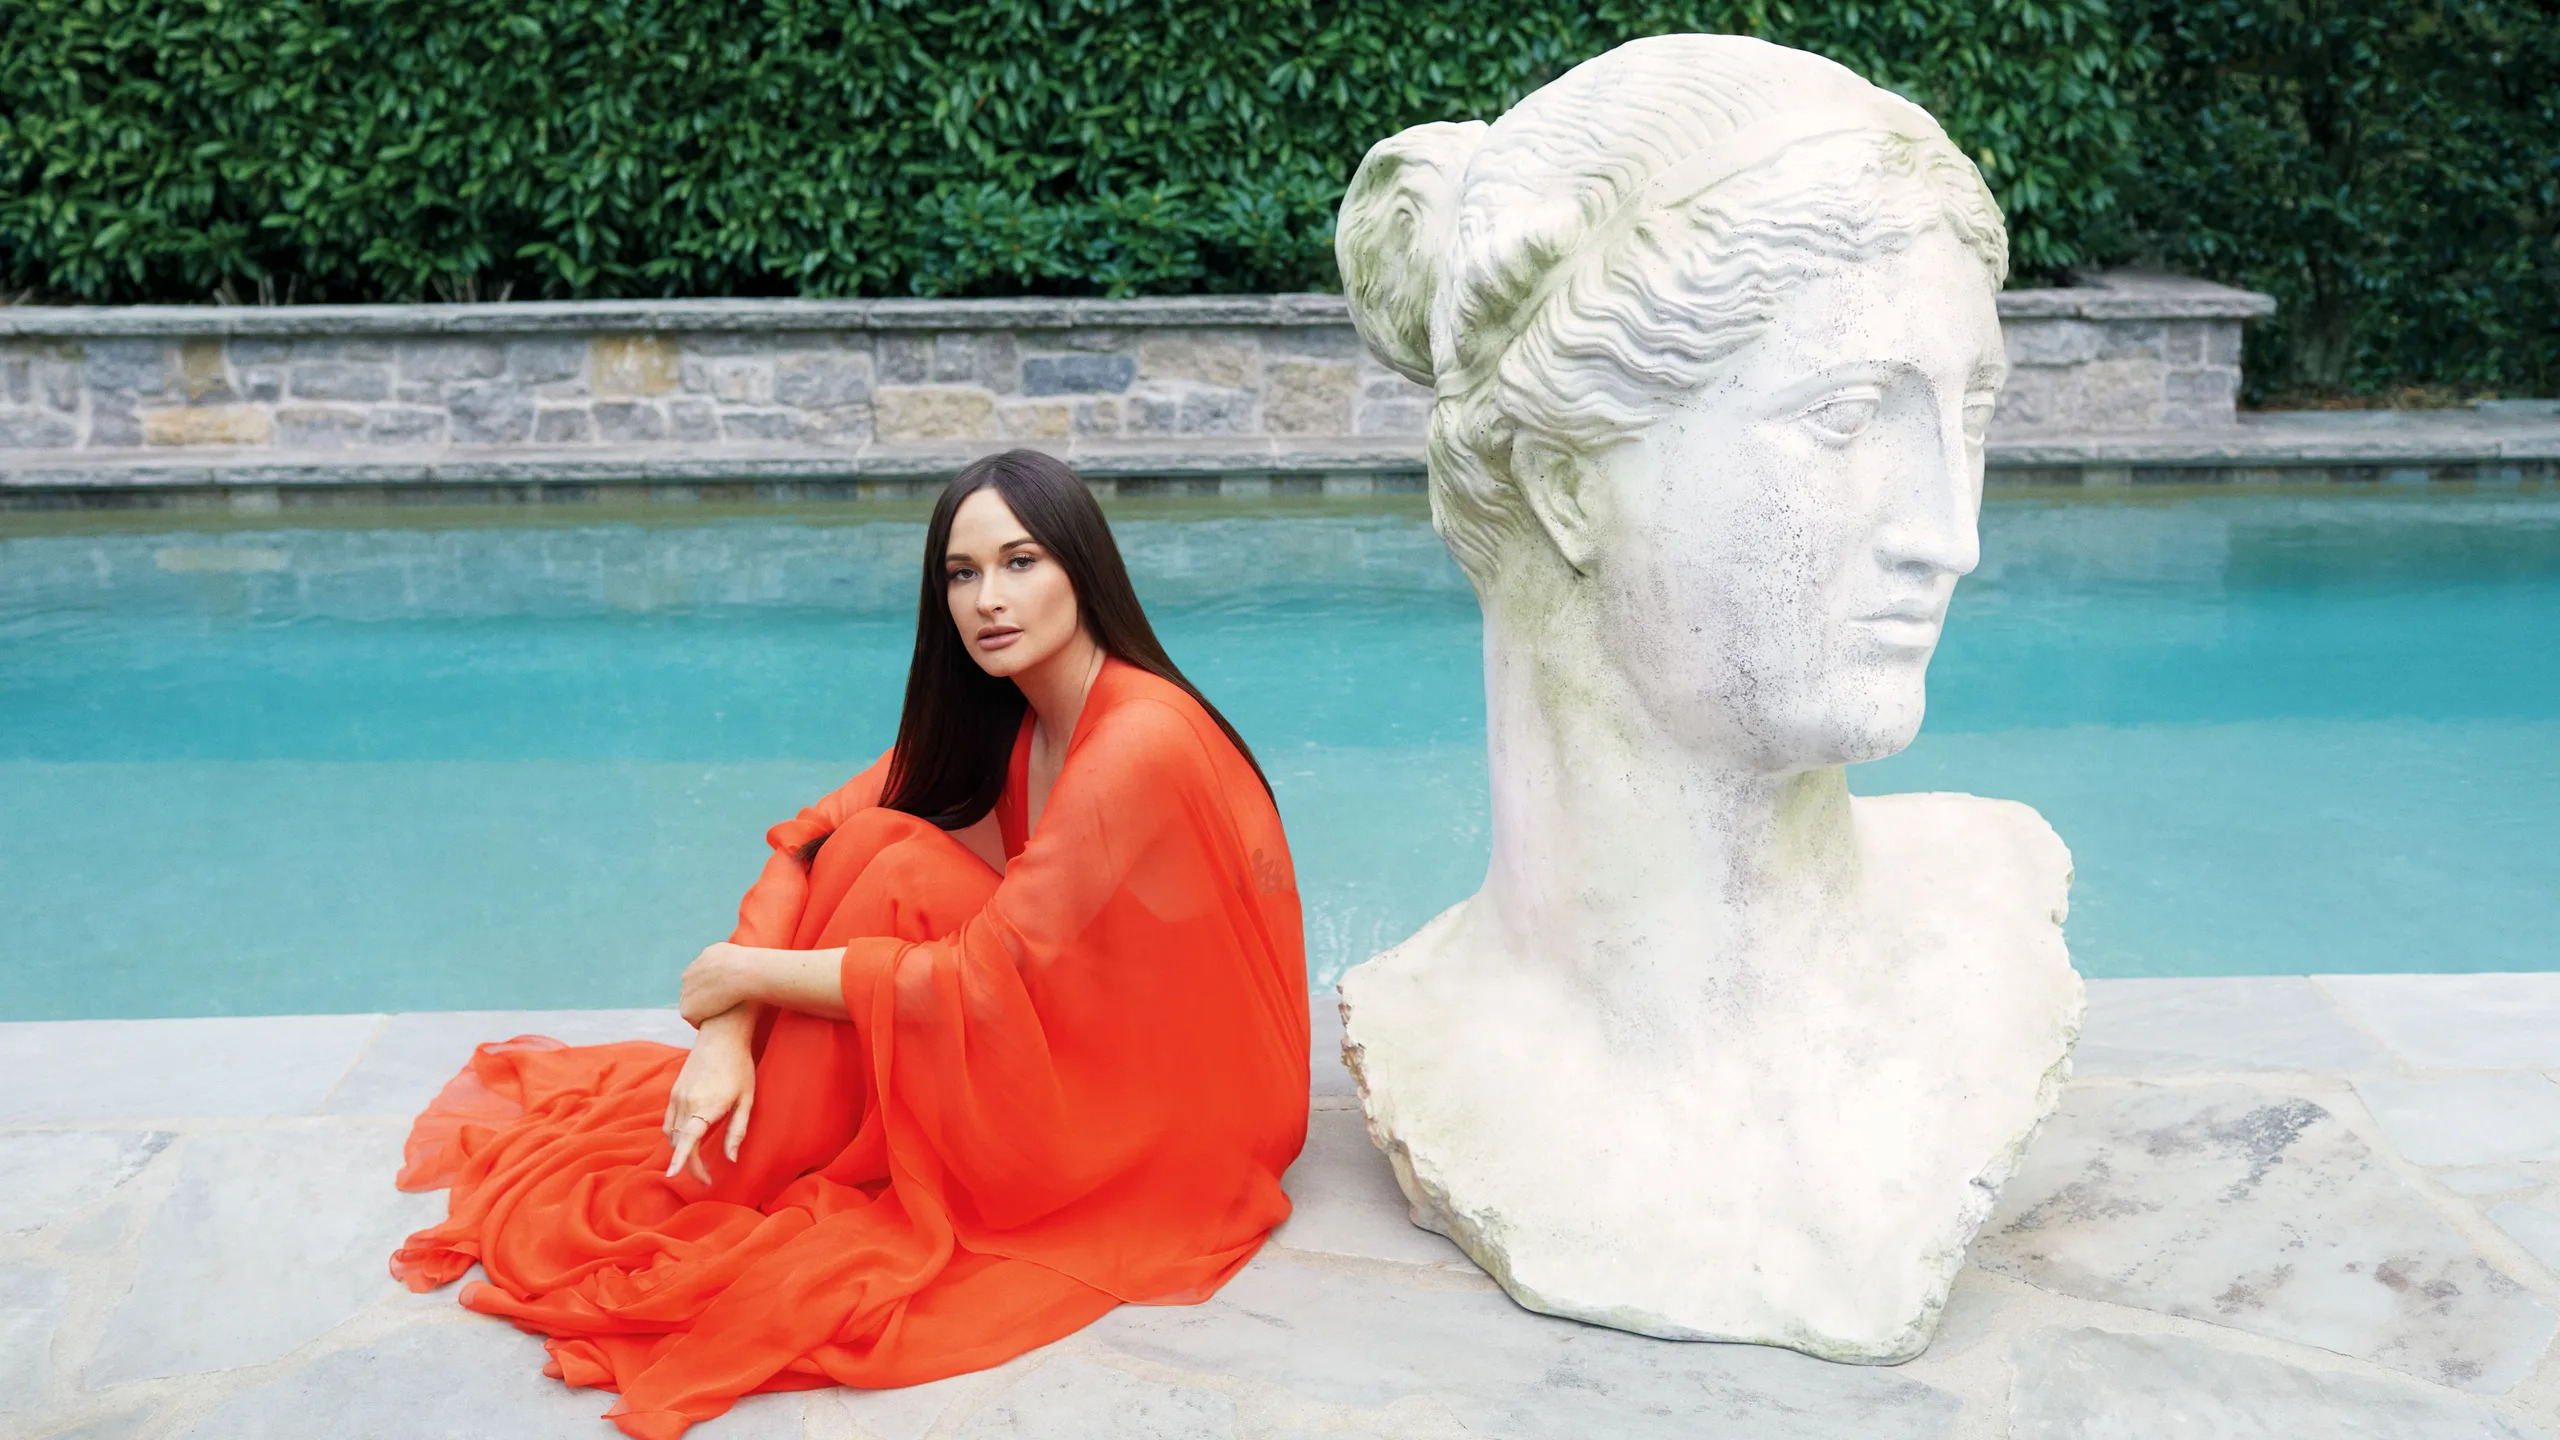 <p>In the dreamy ballad "Slow Burn," Kacey Musgraves blends the twang of country with the whimsy of singer-songwriter storytelling, all while nodding to the influence of an acid trip. Recalling the genesis of the song, Musgraves paints a picture of tranquility, sitting on her porch under the stars, where inspiration struck like a gentle breeze. Penning down her thoughts that evening, she captured the essence of her psychedelic experience, infusing the melody with a sense of otherworldly enchantment. Musgraves doesn't shy away from acknowledging the role of LSD in her creative process, highlighting its ability to expand the mind and spark unconventional insights. This sentiment echoes in her song "Oh What A World," where she muses about the transformative power of nature and consciousness.</p>